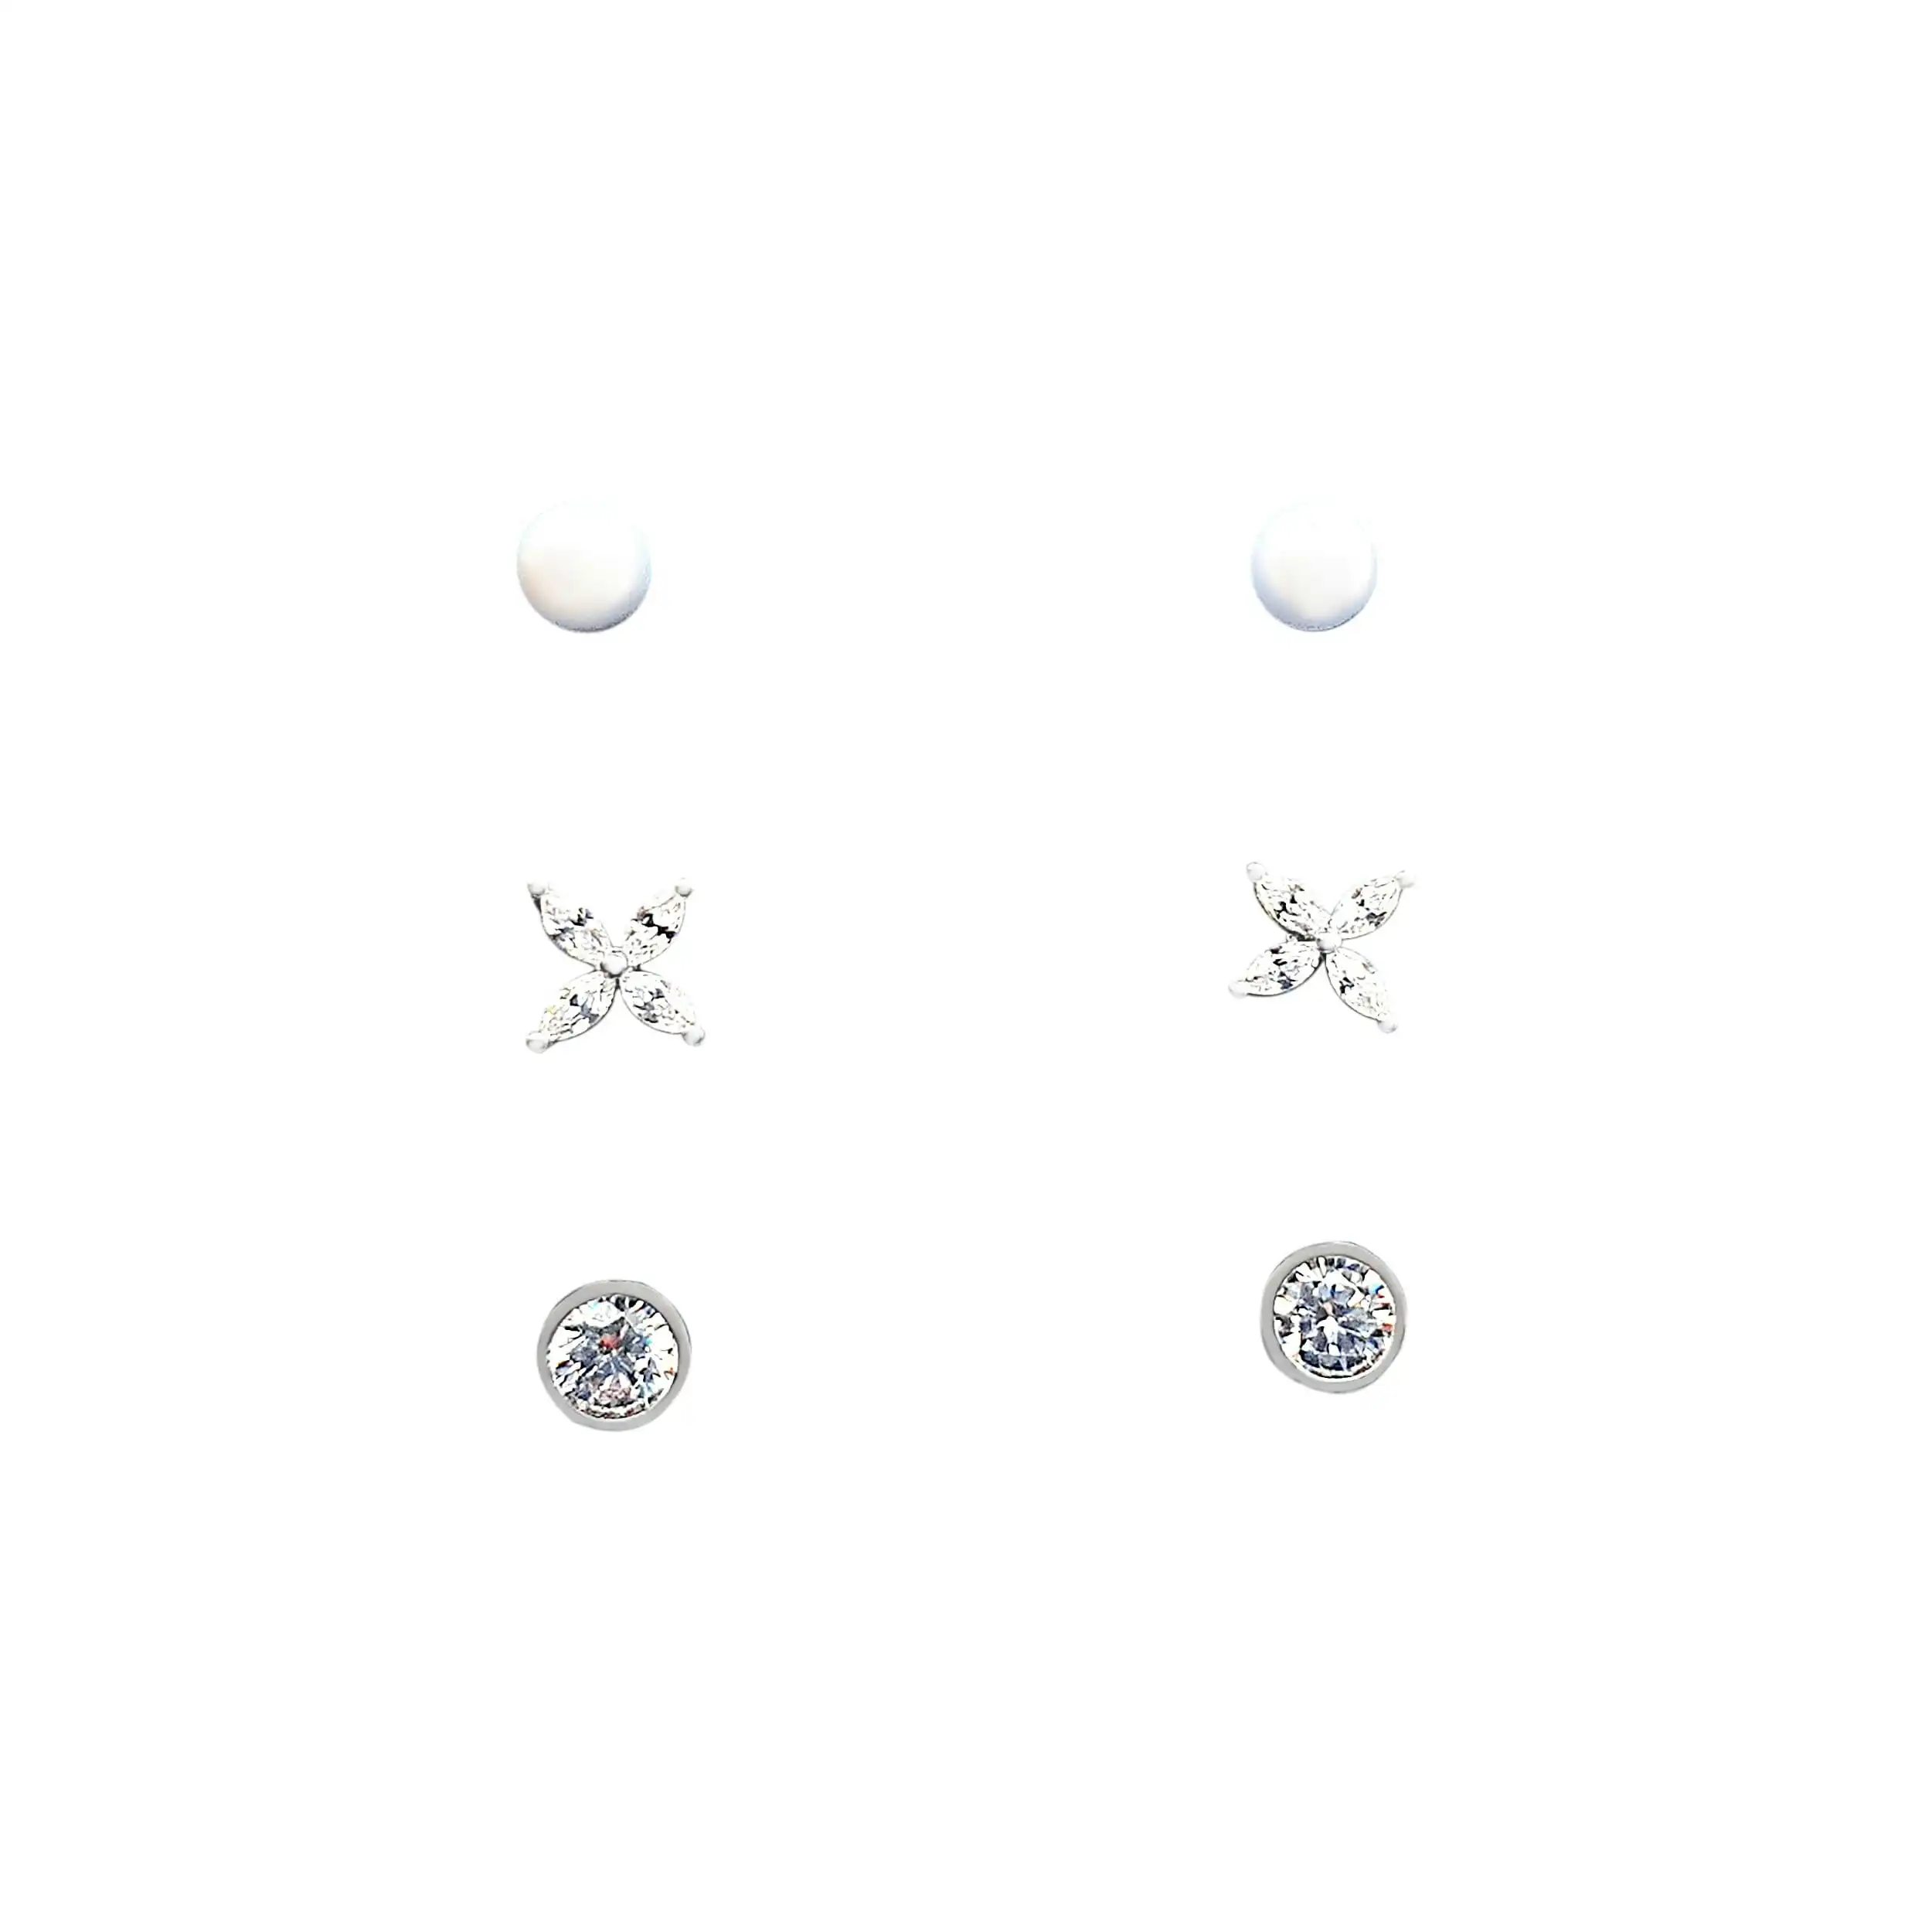 Children's Sterling Silver Stud Earring Set with Synthetic Pearl Stud,Flower Stud and Cubic Zirconia Stud